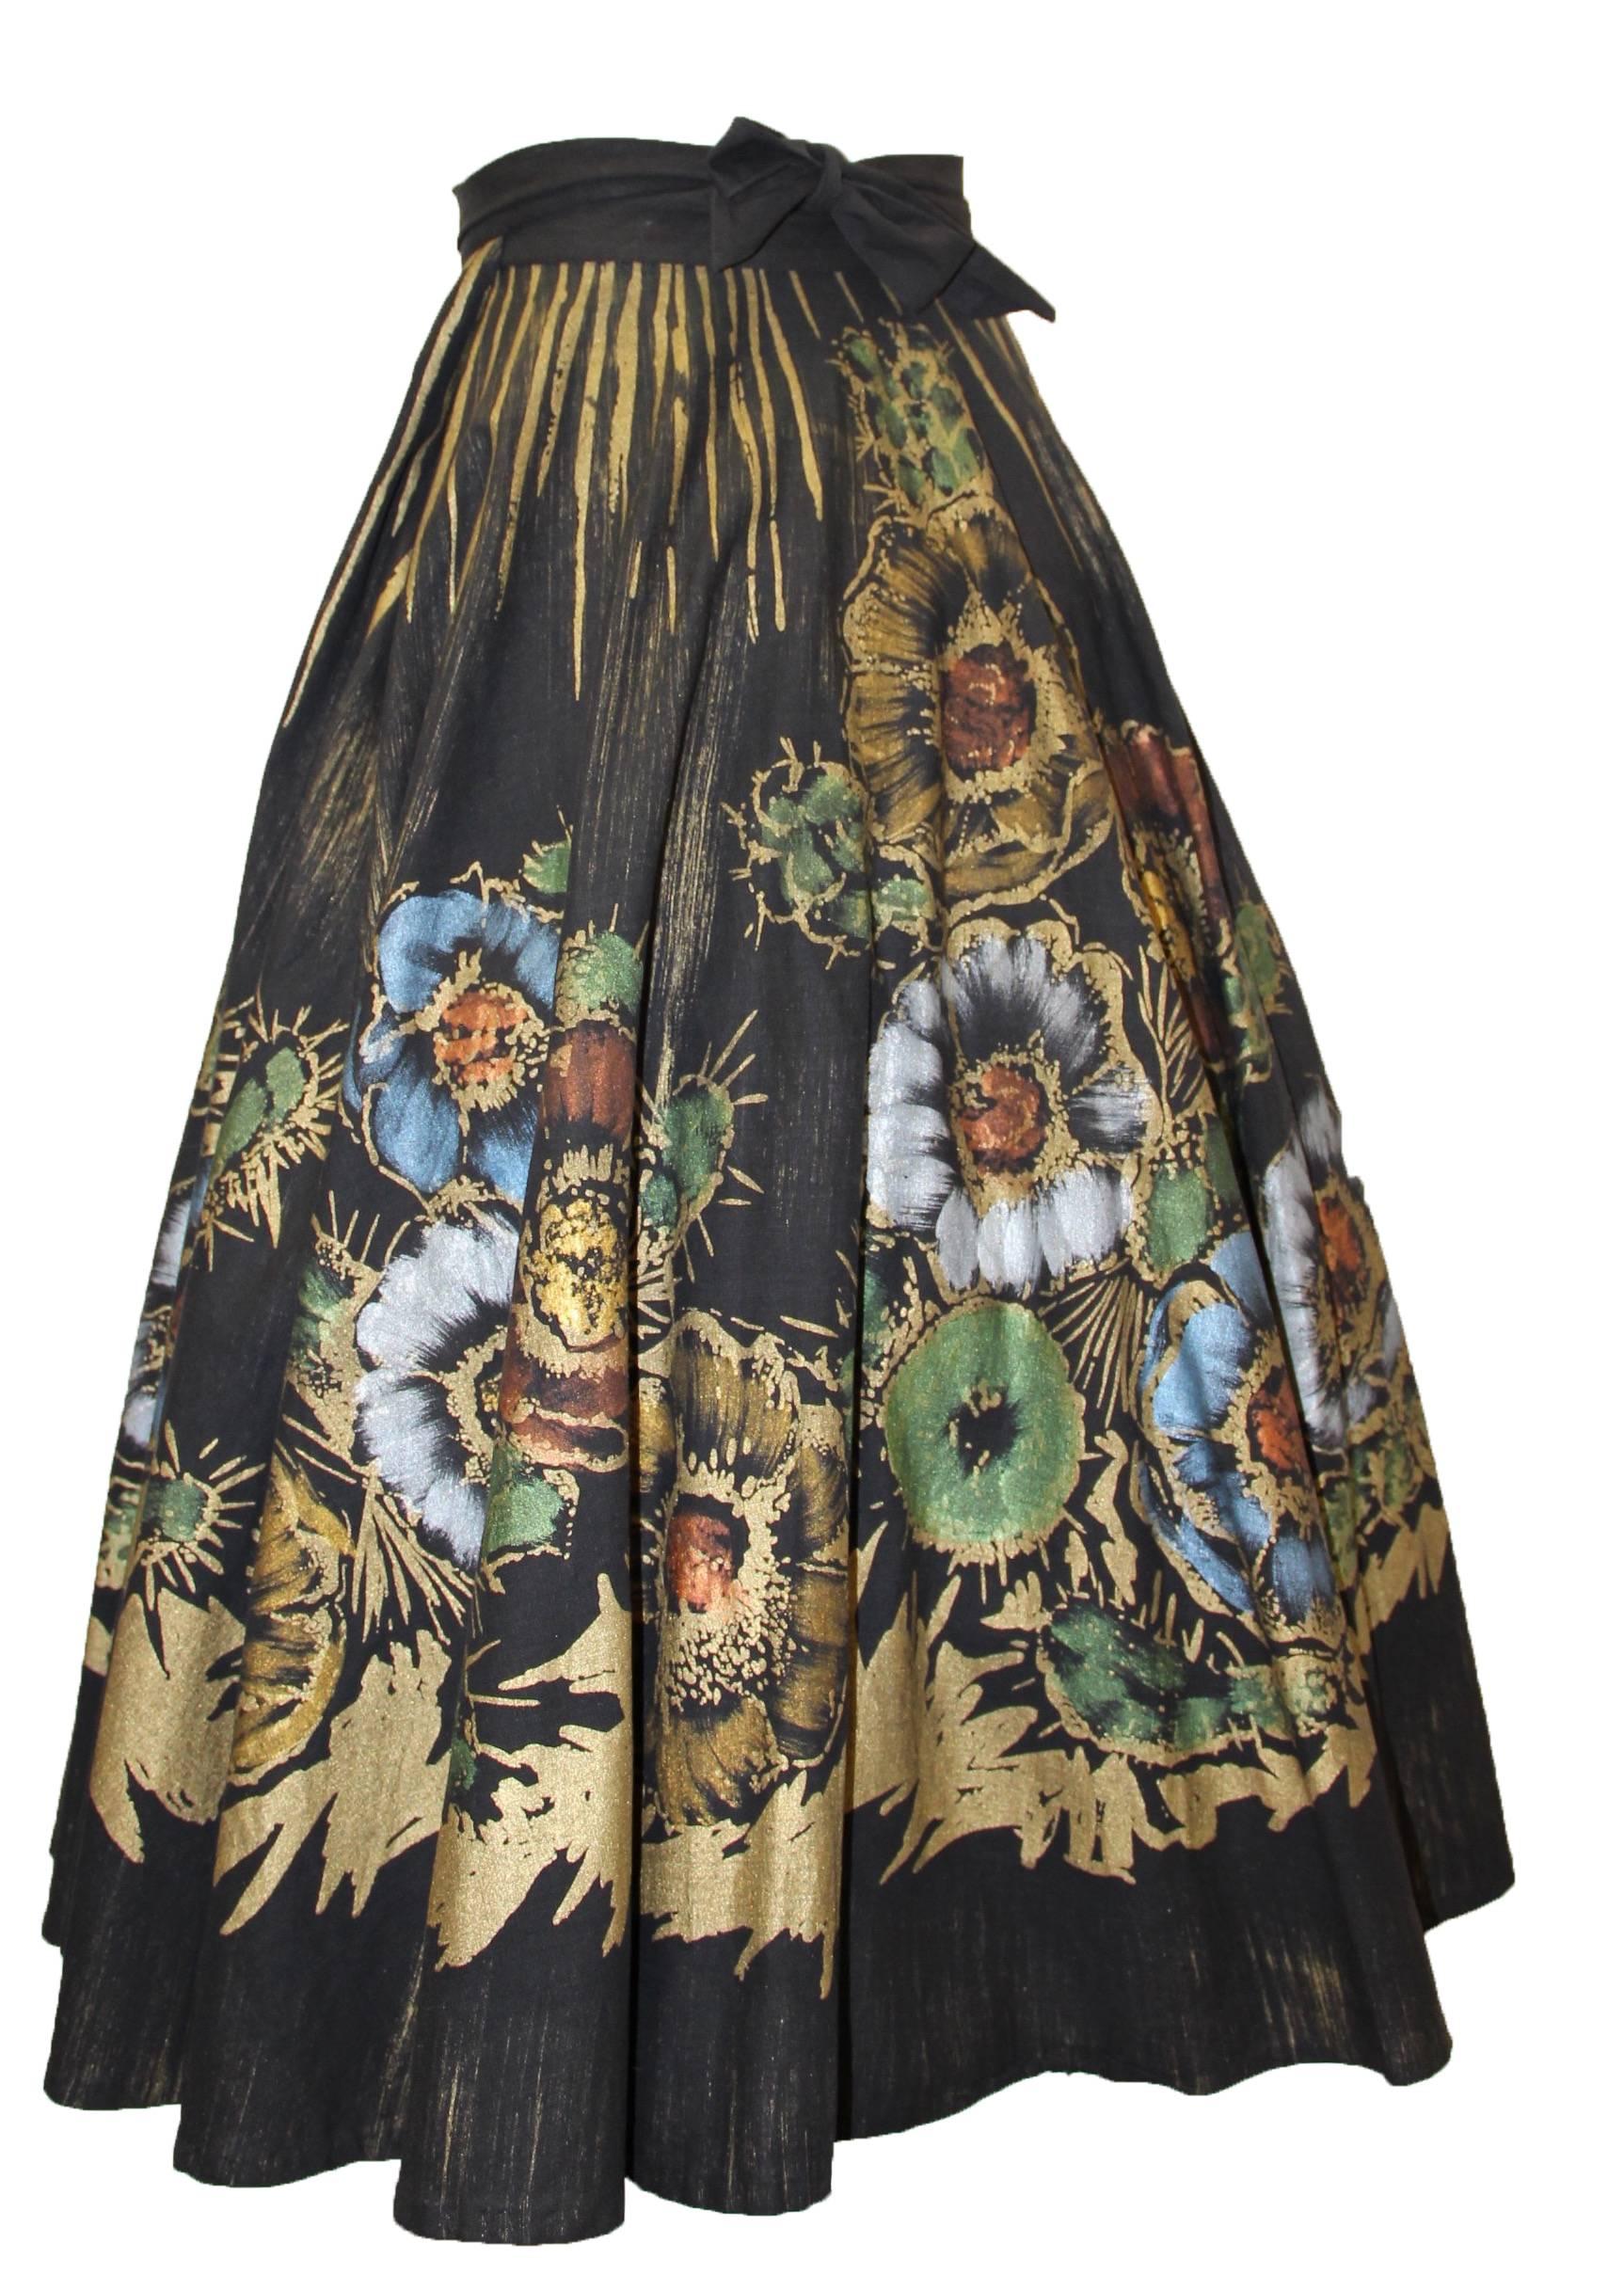 1950s hand painted floral circle skirt with pockets!  

Measurements:
Waist: Approximately 27" ( could be adjusted to fit 1-2 inches smaller or larger)
Circumference: 216" 